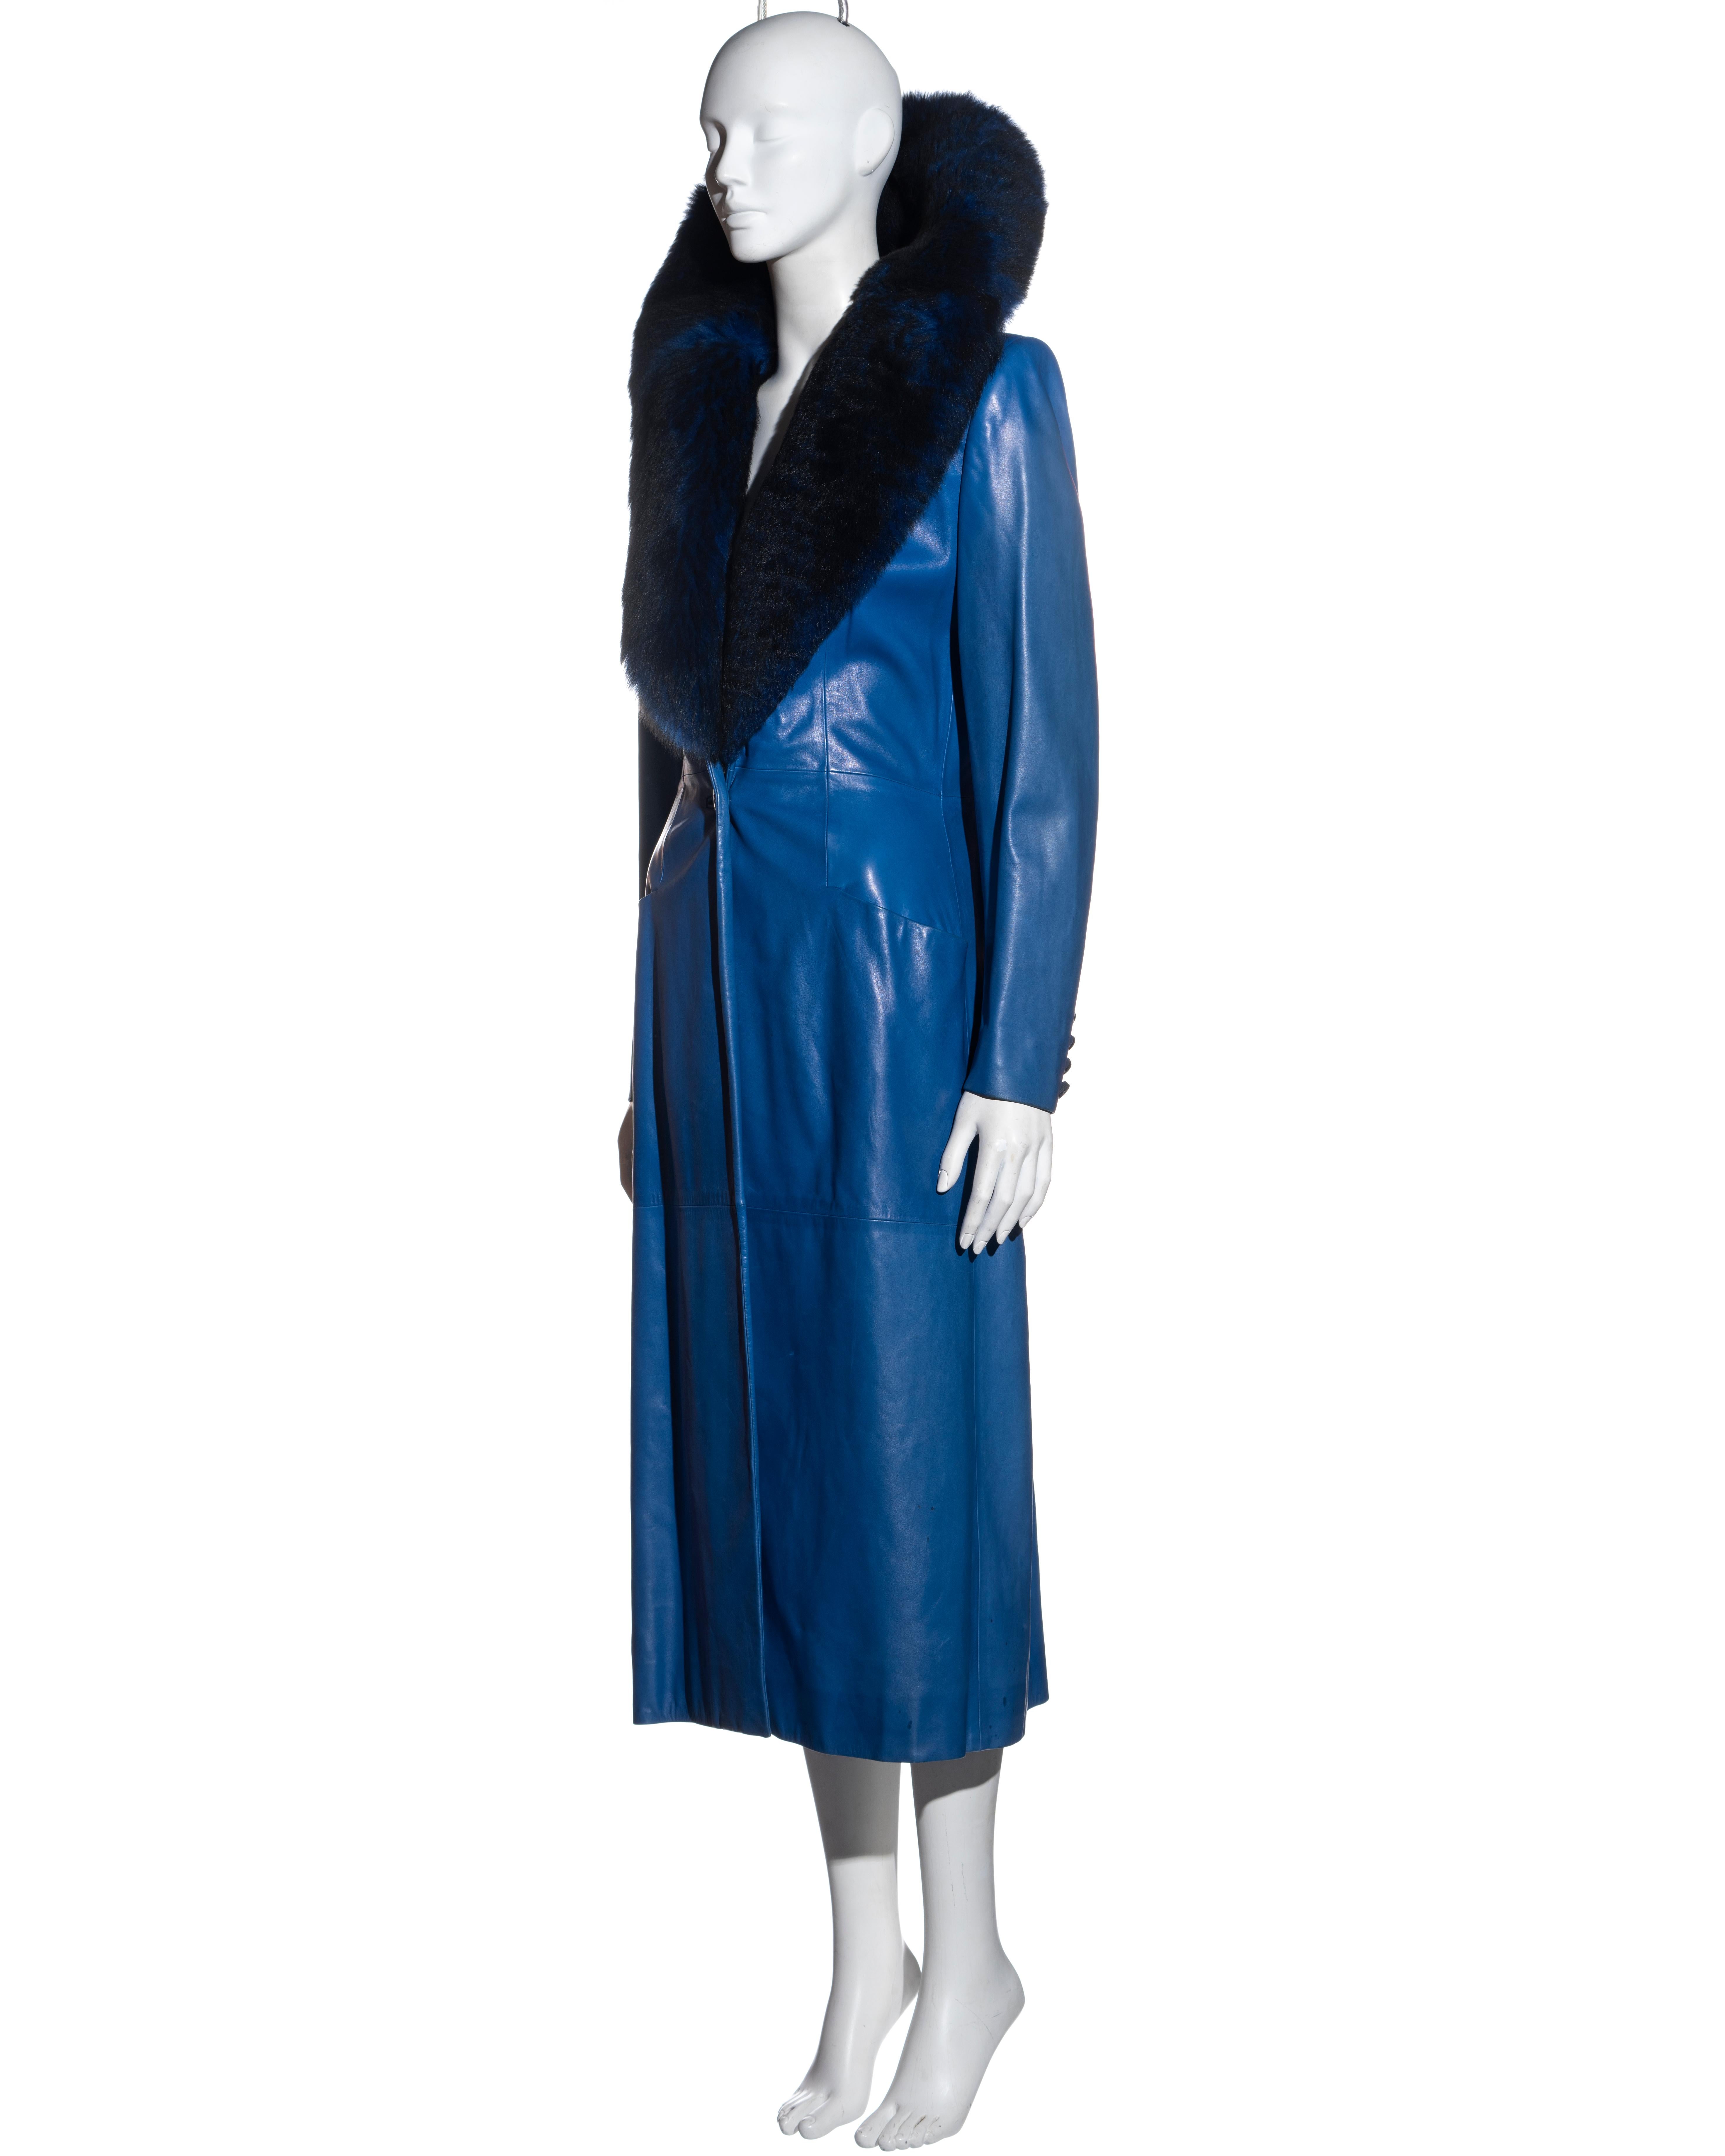 Blue Givenchy by Alexander McQueen blue leather coat with faux fur collar, fw 1998